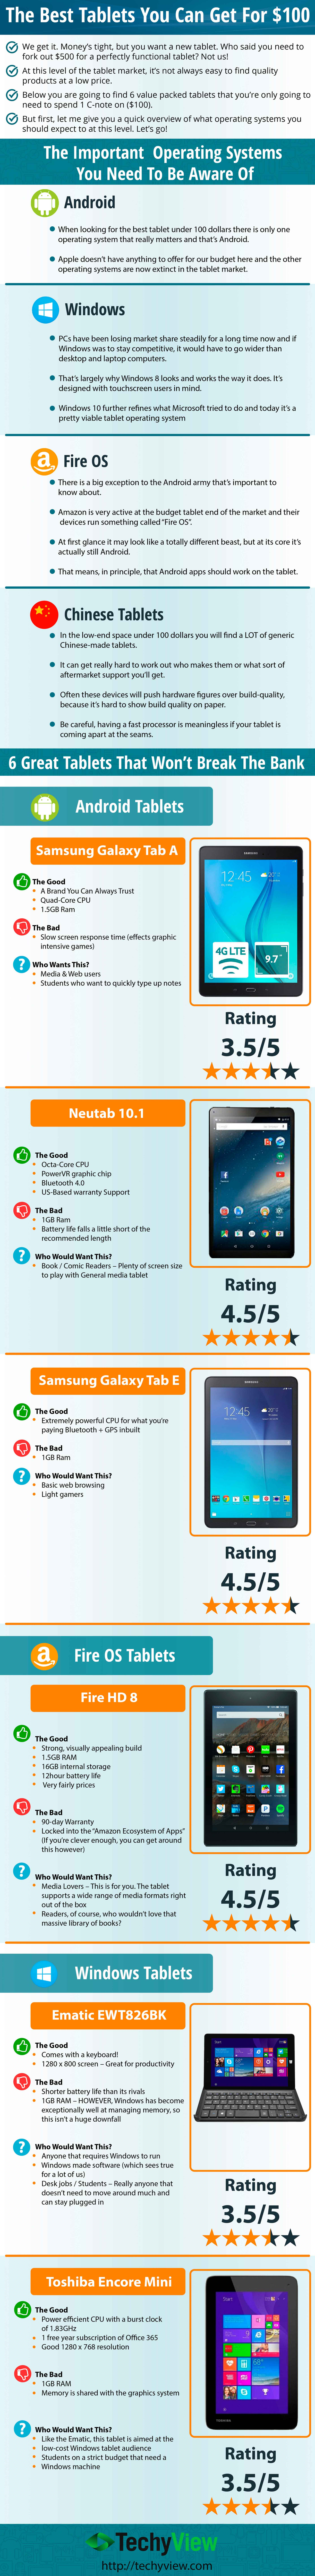 Best Tablets Infographic